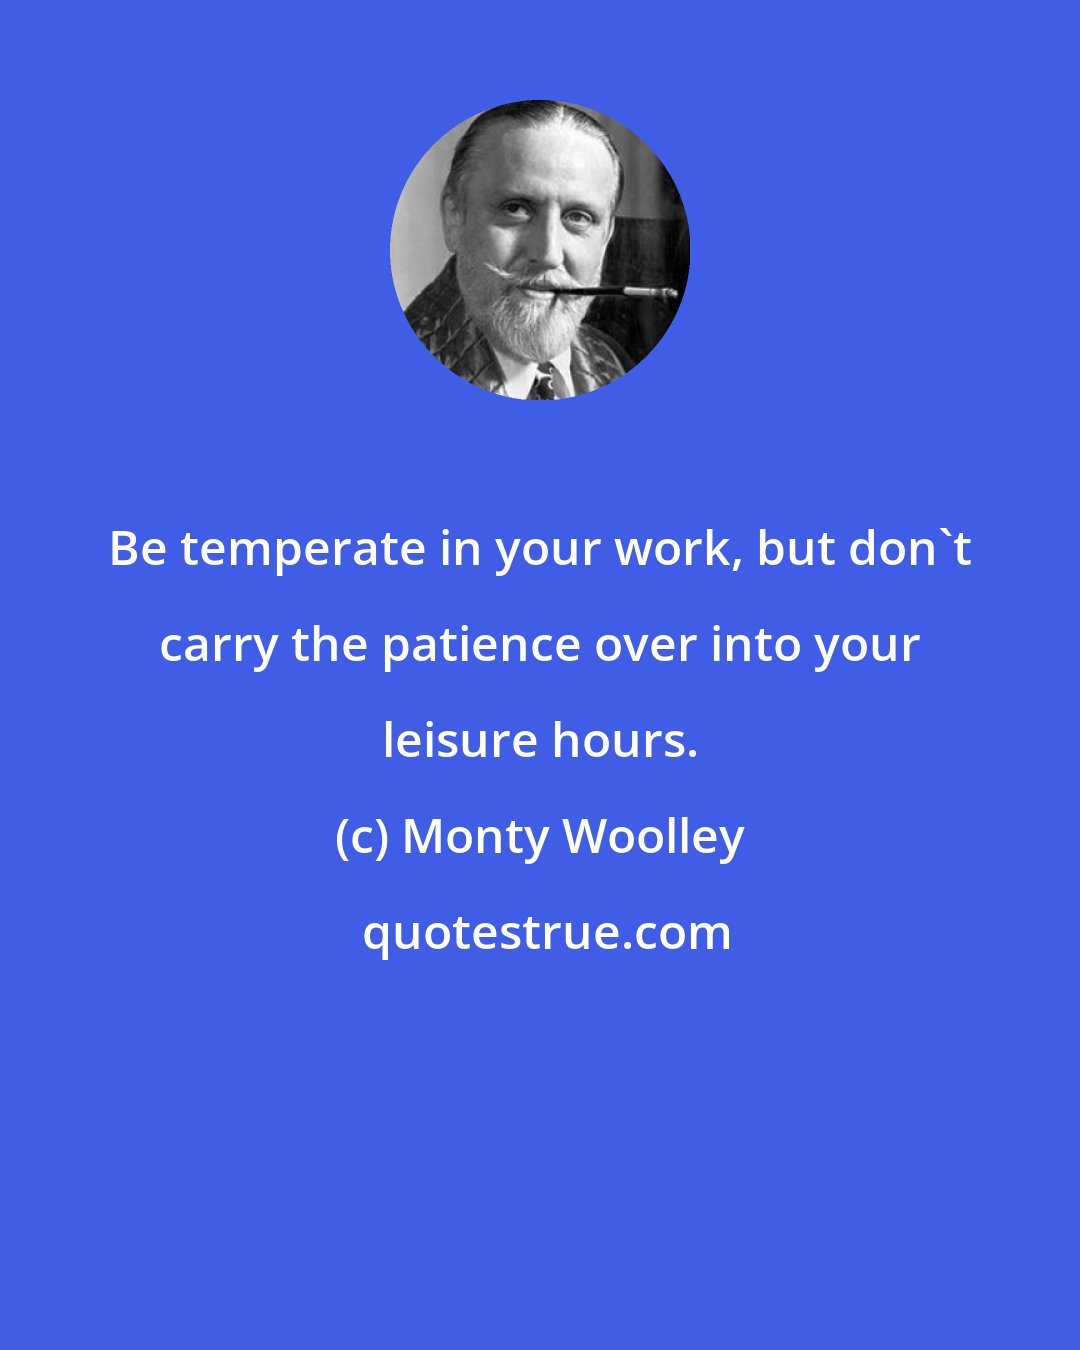 Monty Woolley: Be temperate in your work, but don't carry the patience over into your leisure hours.